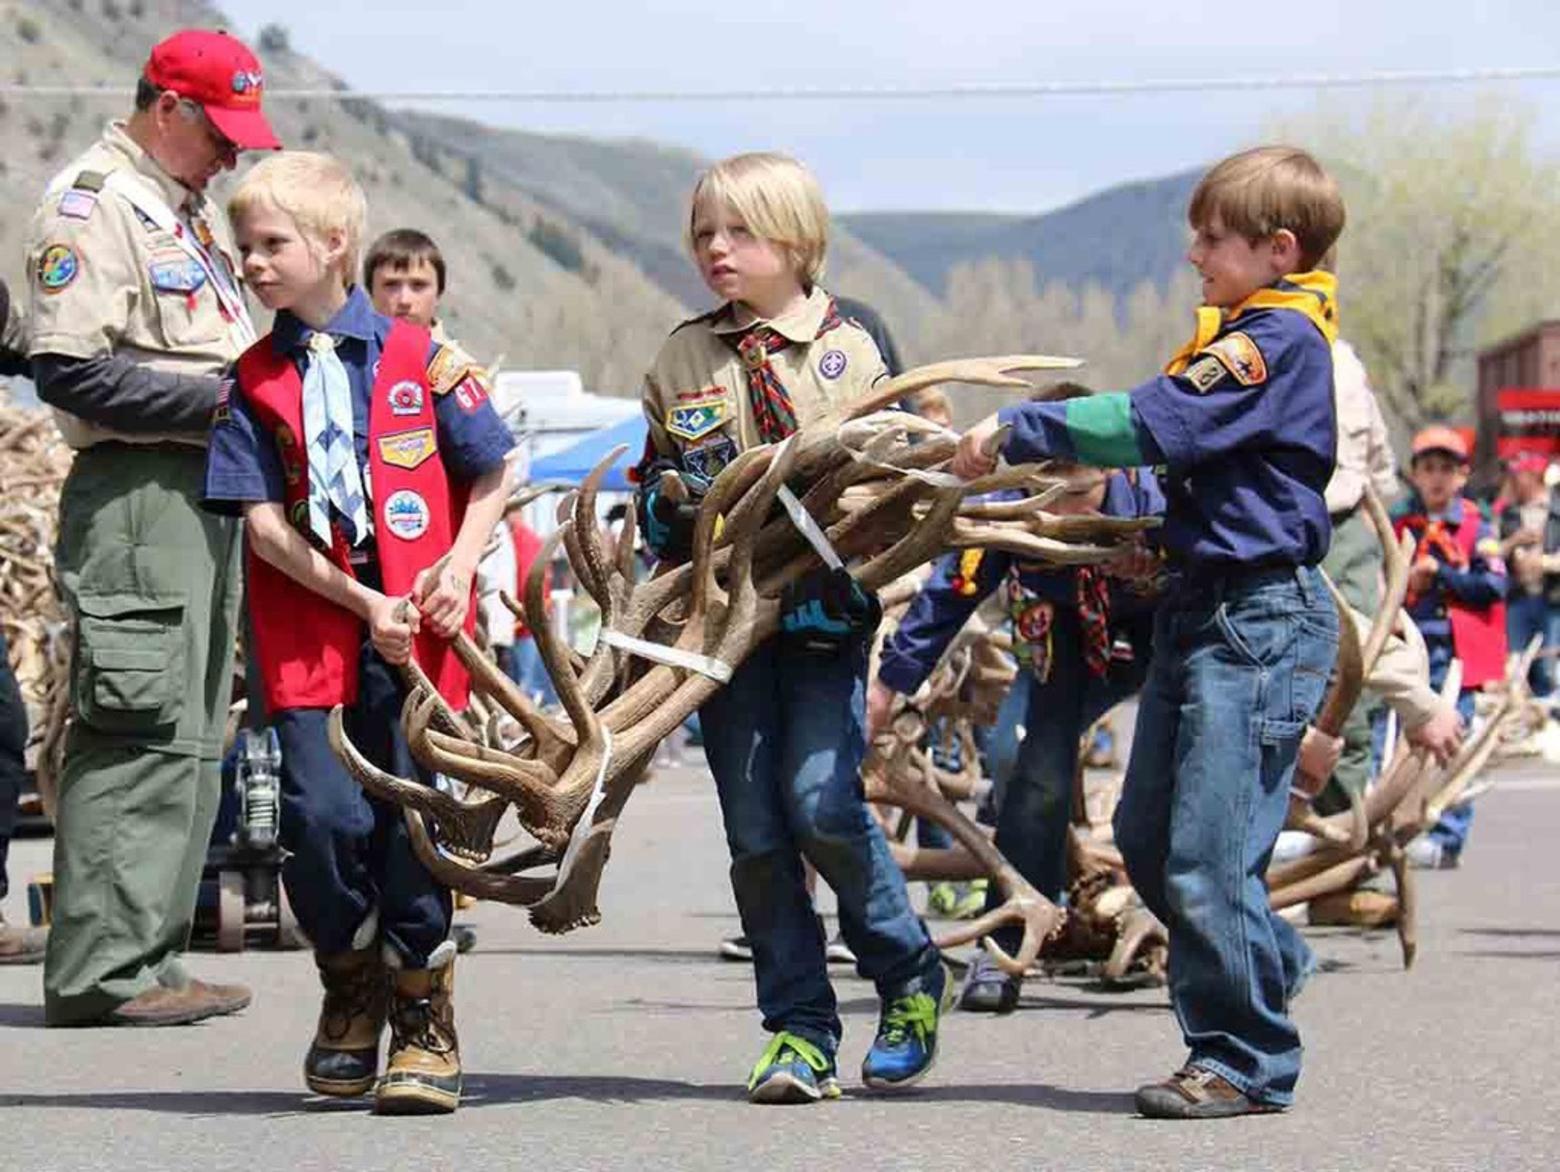 For generations, members of local Cub Scout troops in Jackson Hole would gather antlers every spring on the National Elk Refuge and then sell them at auction to raise funds for Refuge operations and support ongoing scouting operations. Since its beginning, Cub Scouts were solely the domain of boys with Brownies and Girl Scouts being the gender alternative. Today, scouting nationwide is arrayed under a common banner that brings both boys and girl together.  That includes participating in antler collection.  Photo courtesy Lori Iverson/US Fish and Wildlife Service